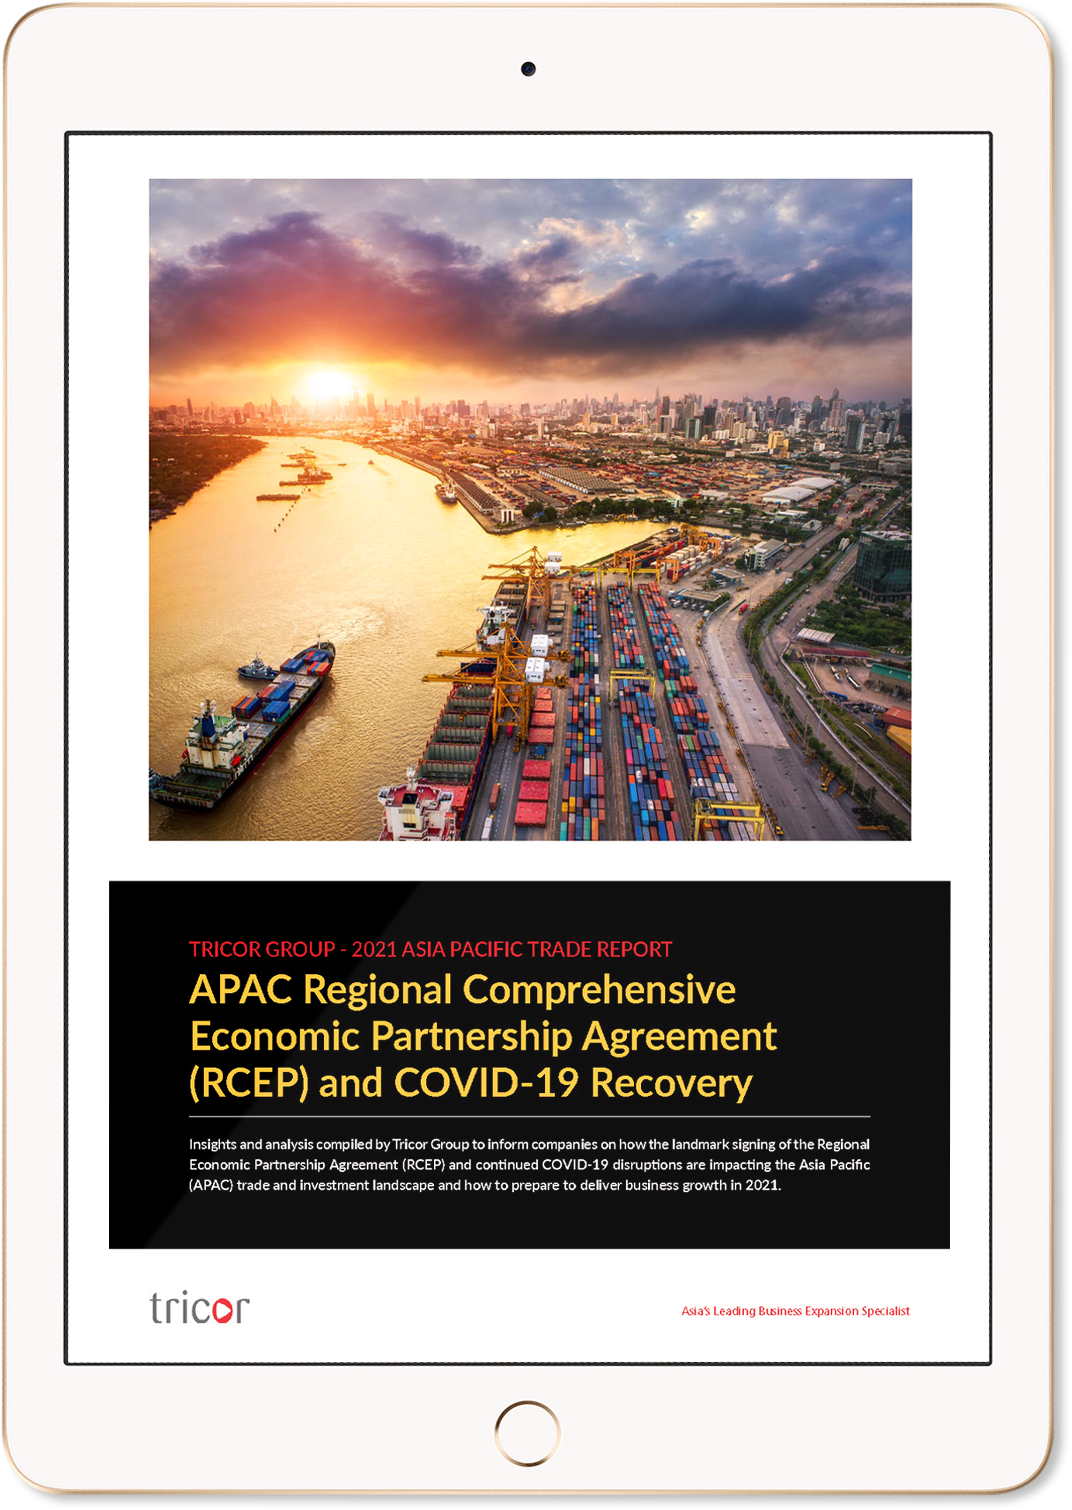 APAC Regional Comprehensive Economic Partnership Agreement (RCEP) and COVID-19 Recovery